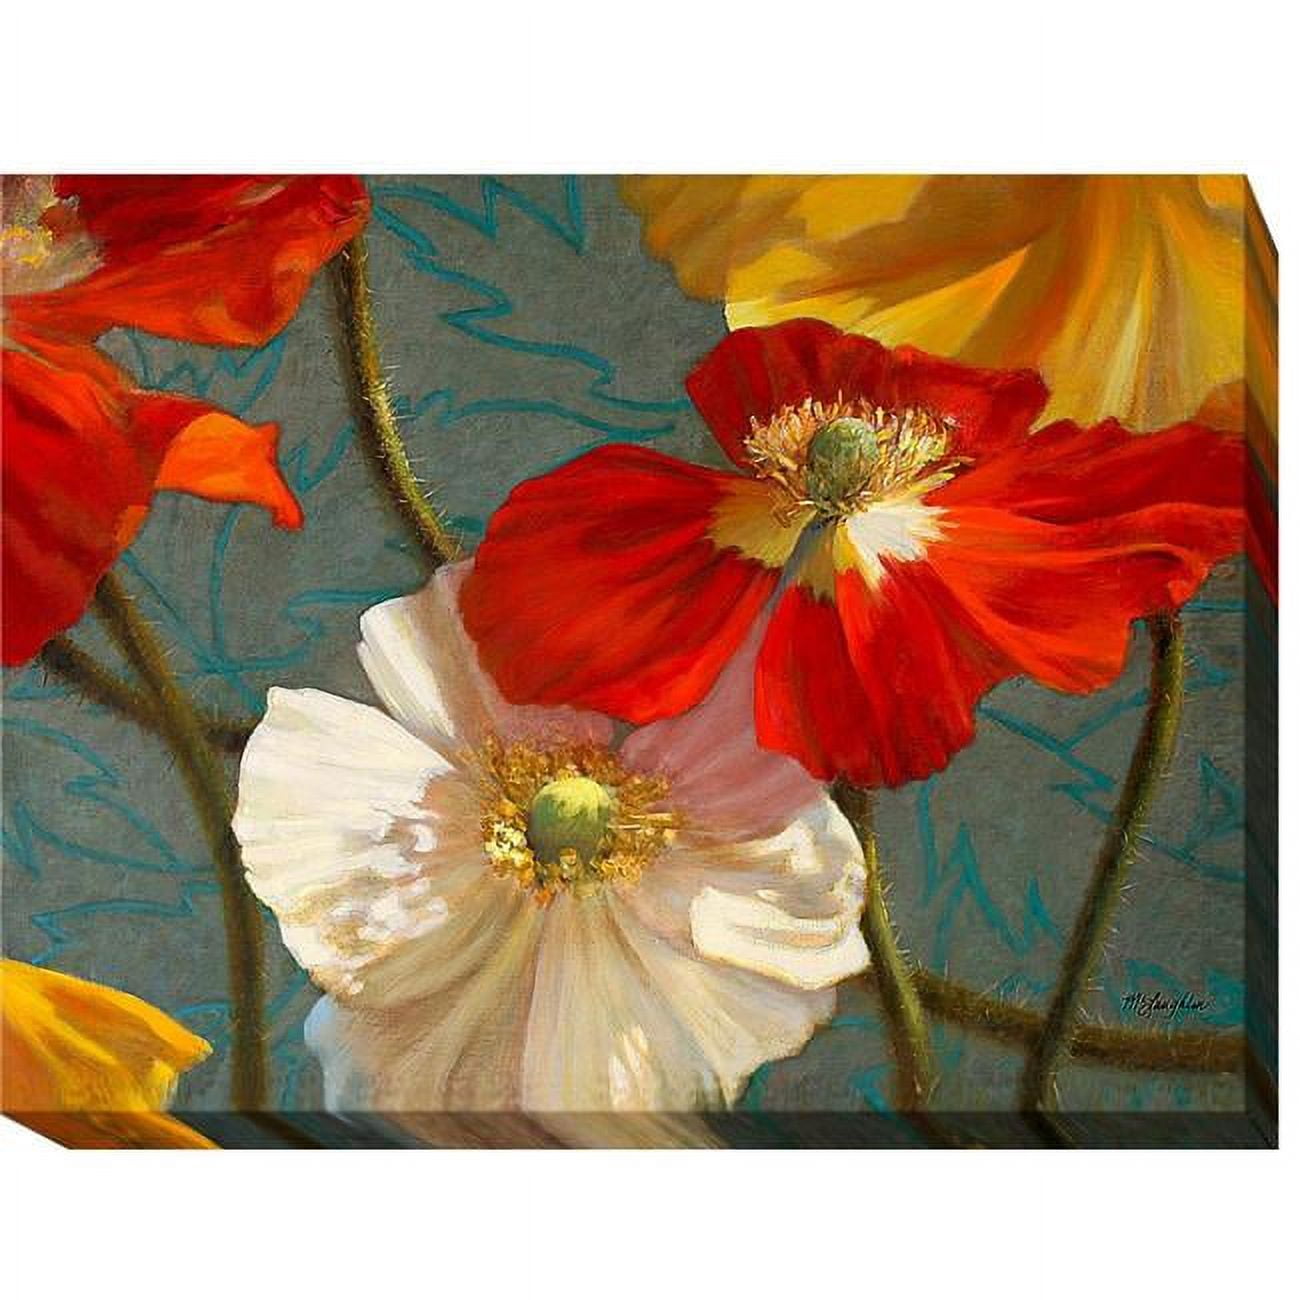 1216am430ig Poppycock By Jan Mclaughlin Premium Gallery-wrapped Canvas Giclee Art - 12 X 16 X 1.5 In.